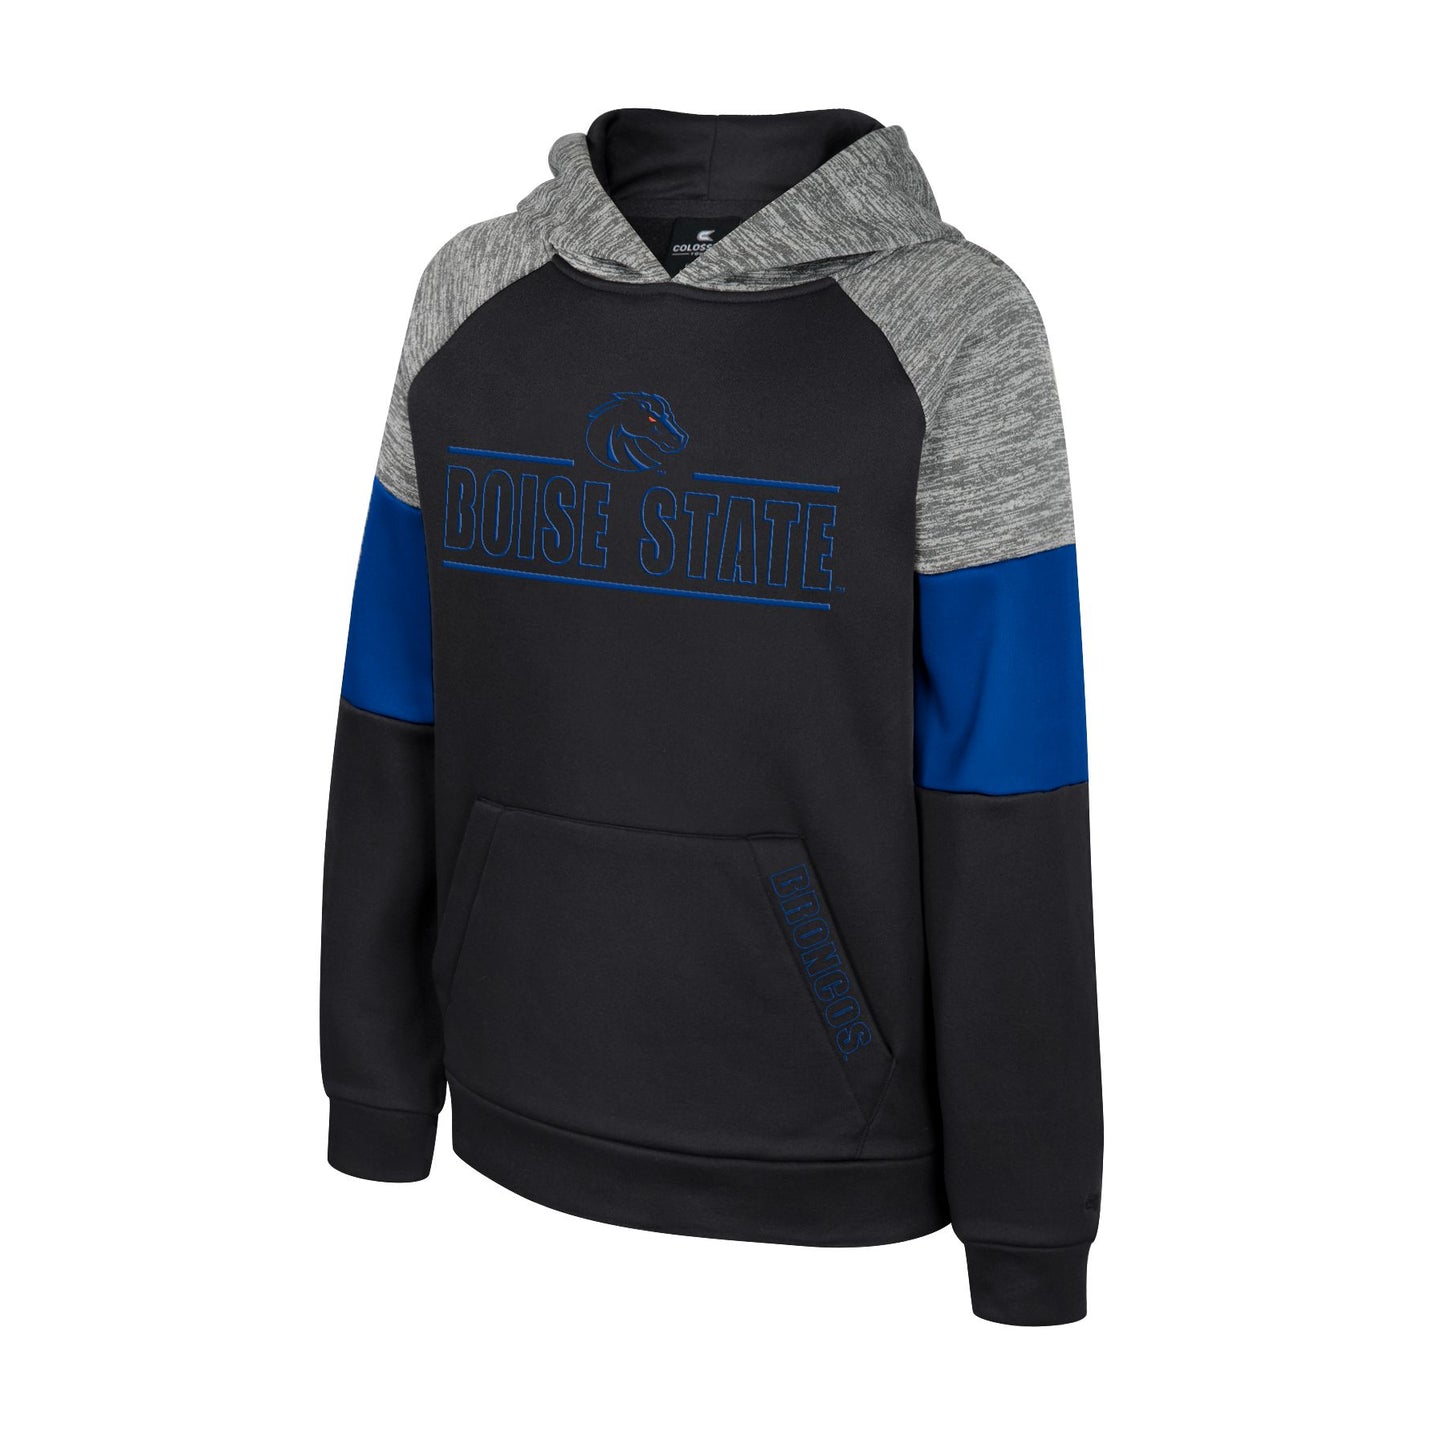 Boise State Broncos Youth Colosseum Hoodie (Black)